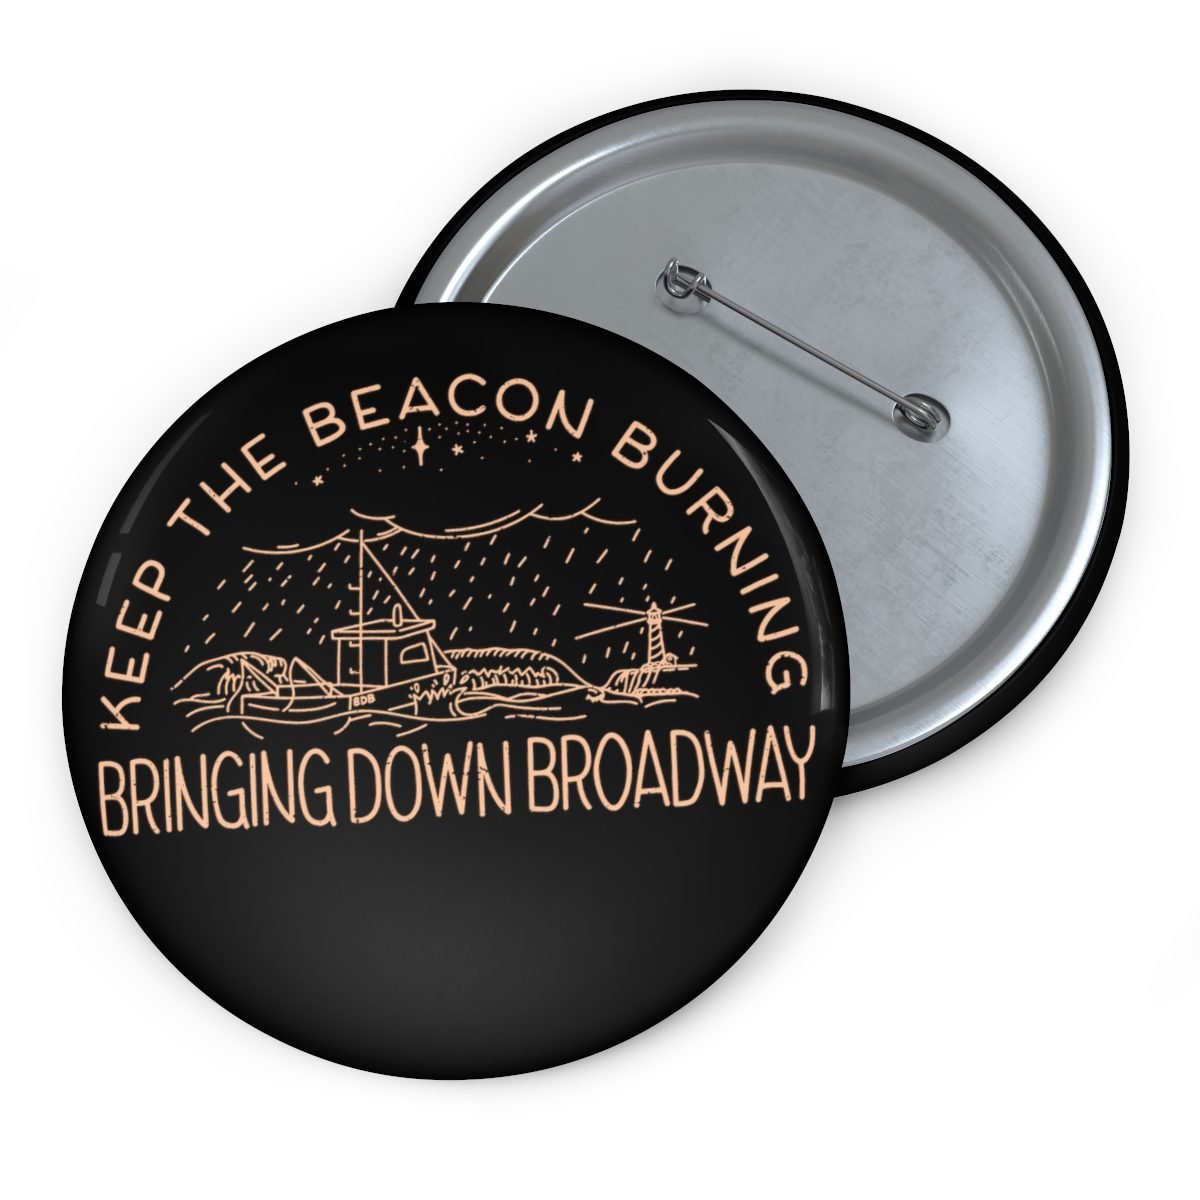 Bringing Down Broadway – Beacon Pin Buttons